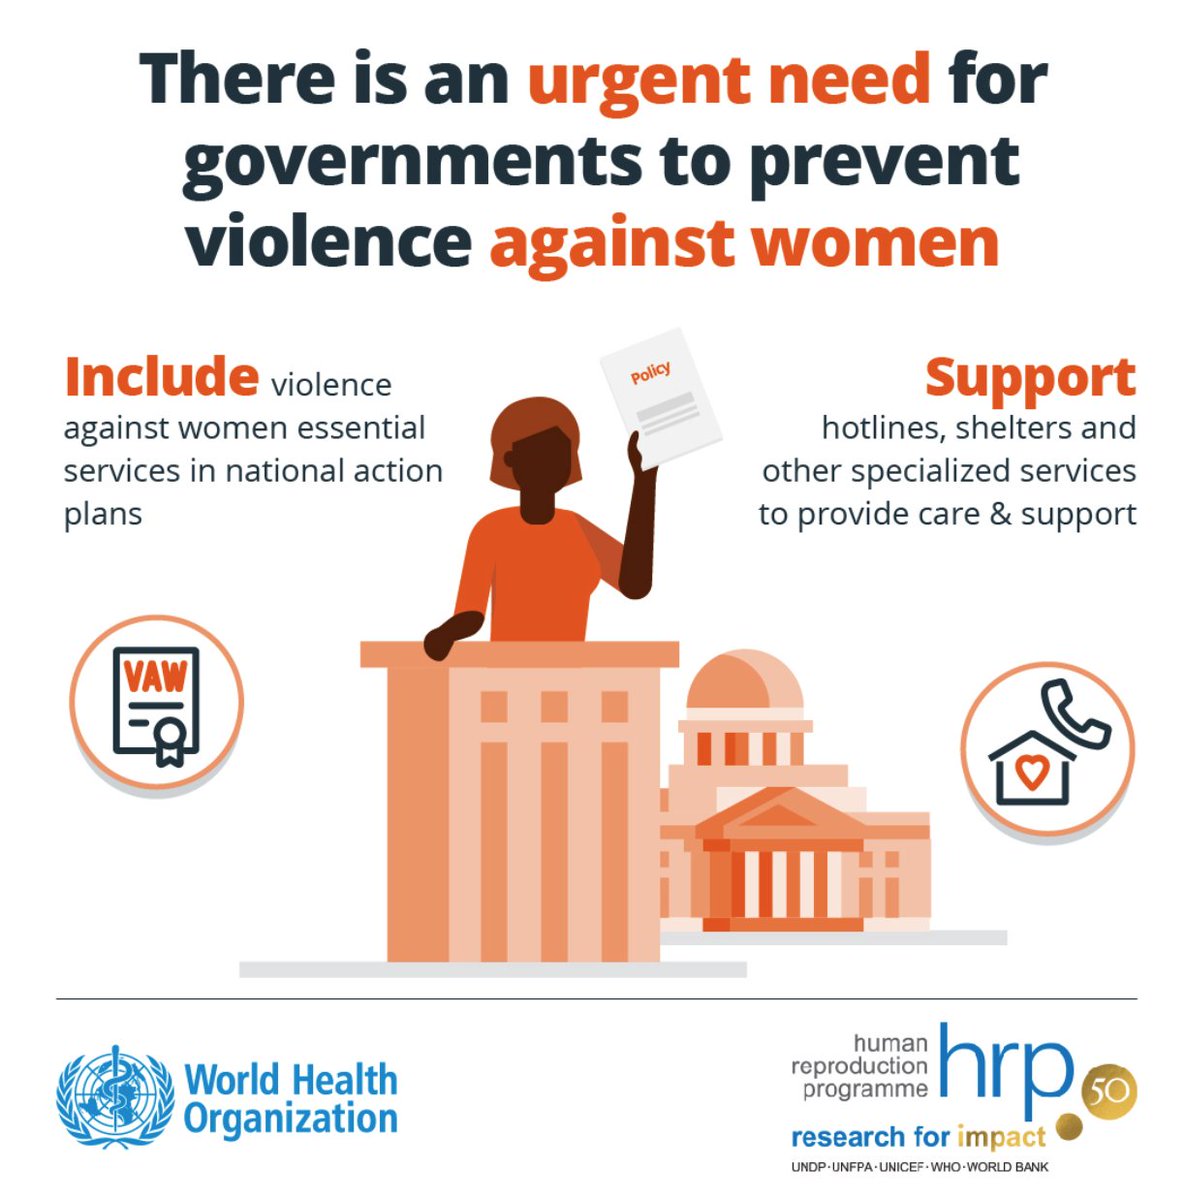 It’s the International Day to #ENDviolence against Women. Preventing and responding to violence against women is a priority for: ☑️human rights ☑️gender equality ☑️public health Learn more: bit.ly/47CpiKC